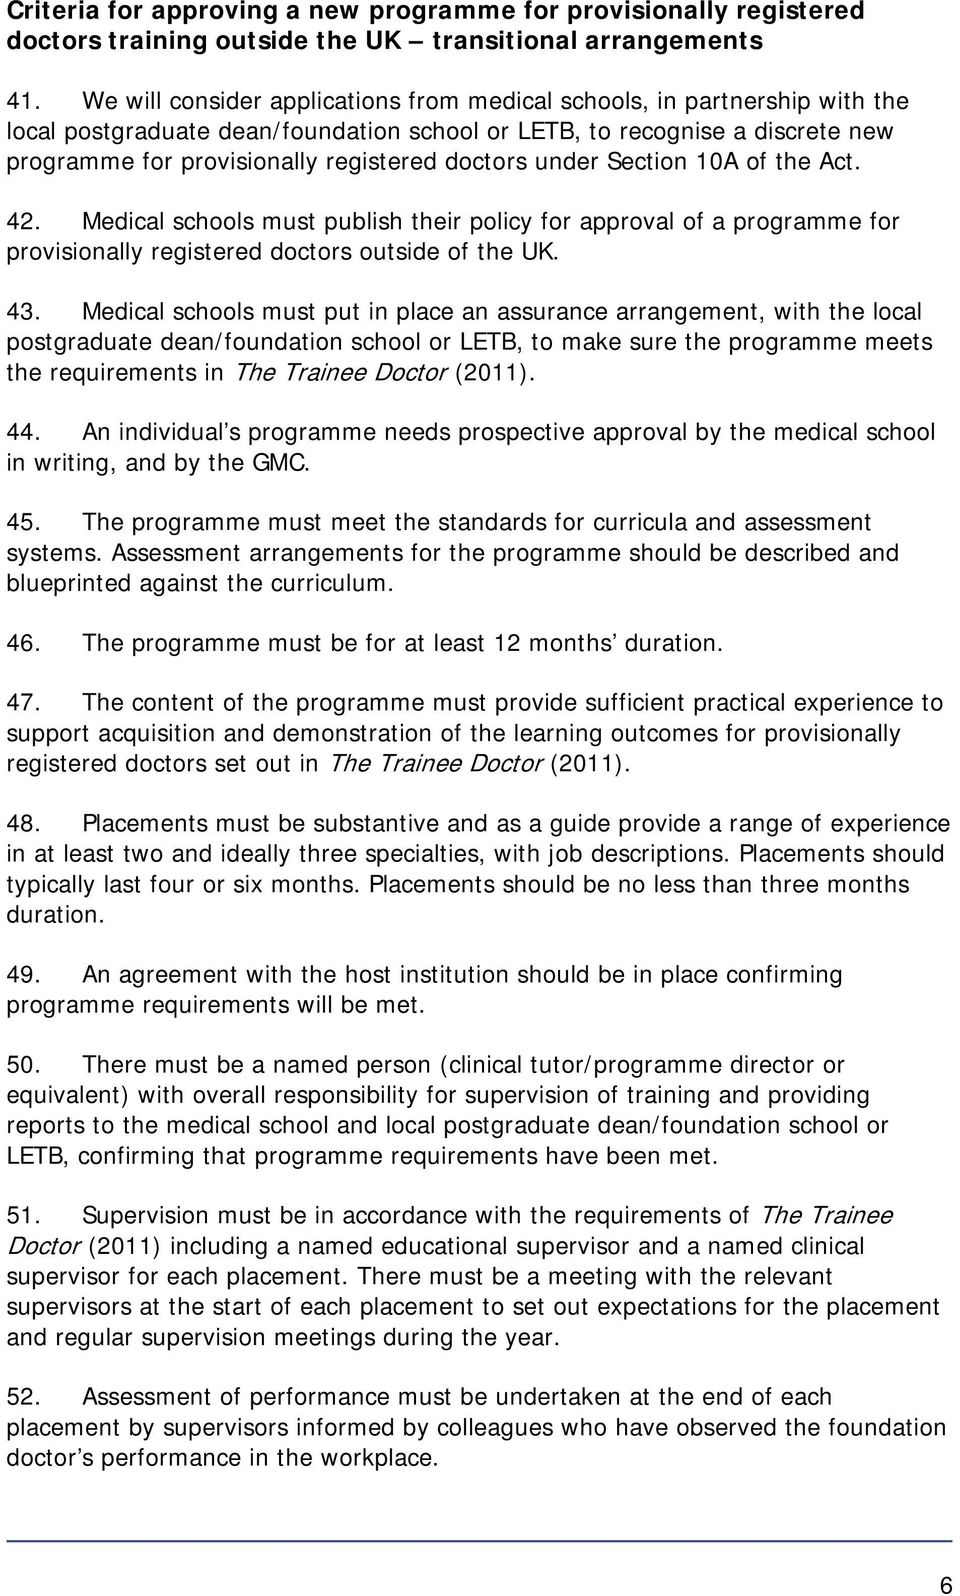 doctors under Section 10A of the Act. 42. Medical schools must publish their policy for approval of a programme for provisionally registered doctors outside of the UK. 43.